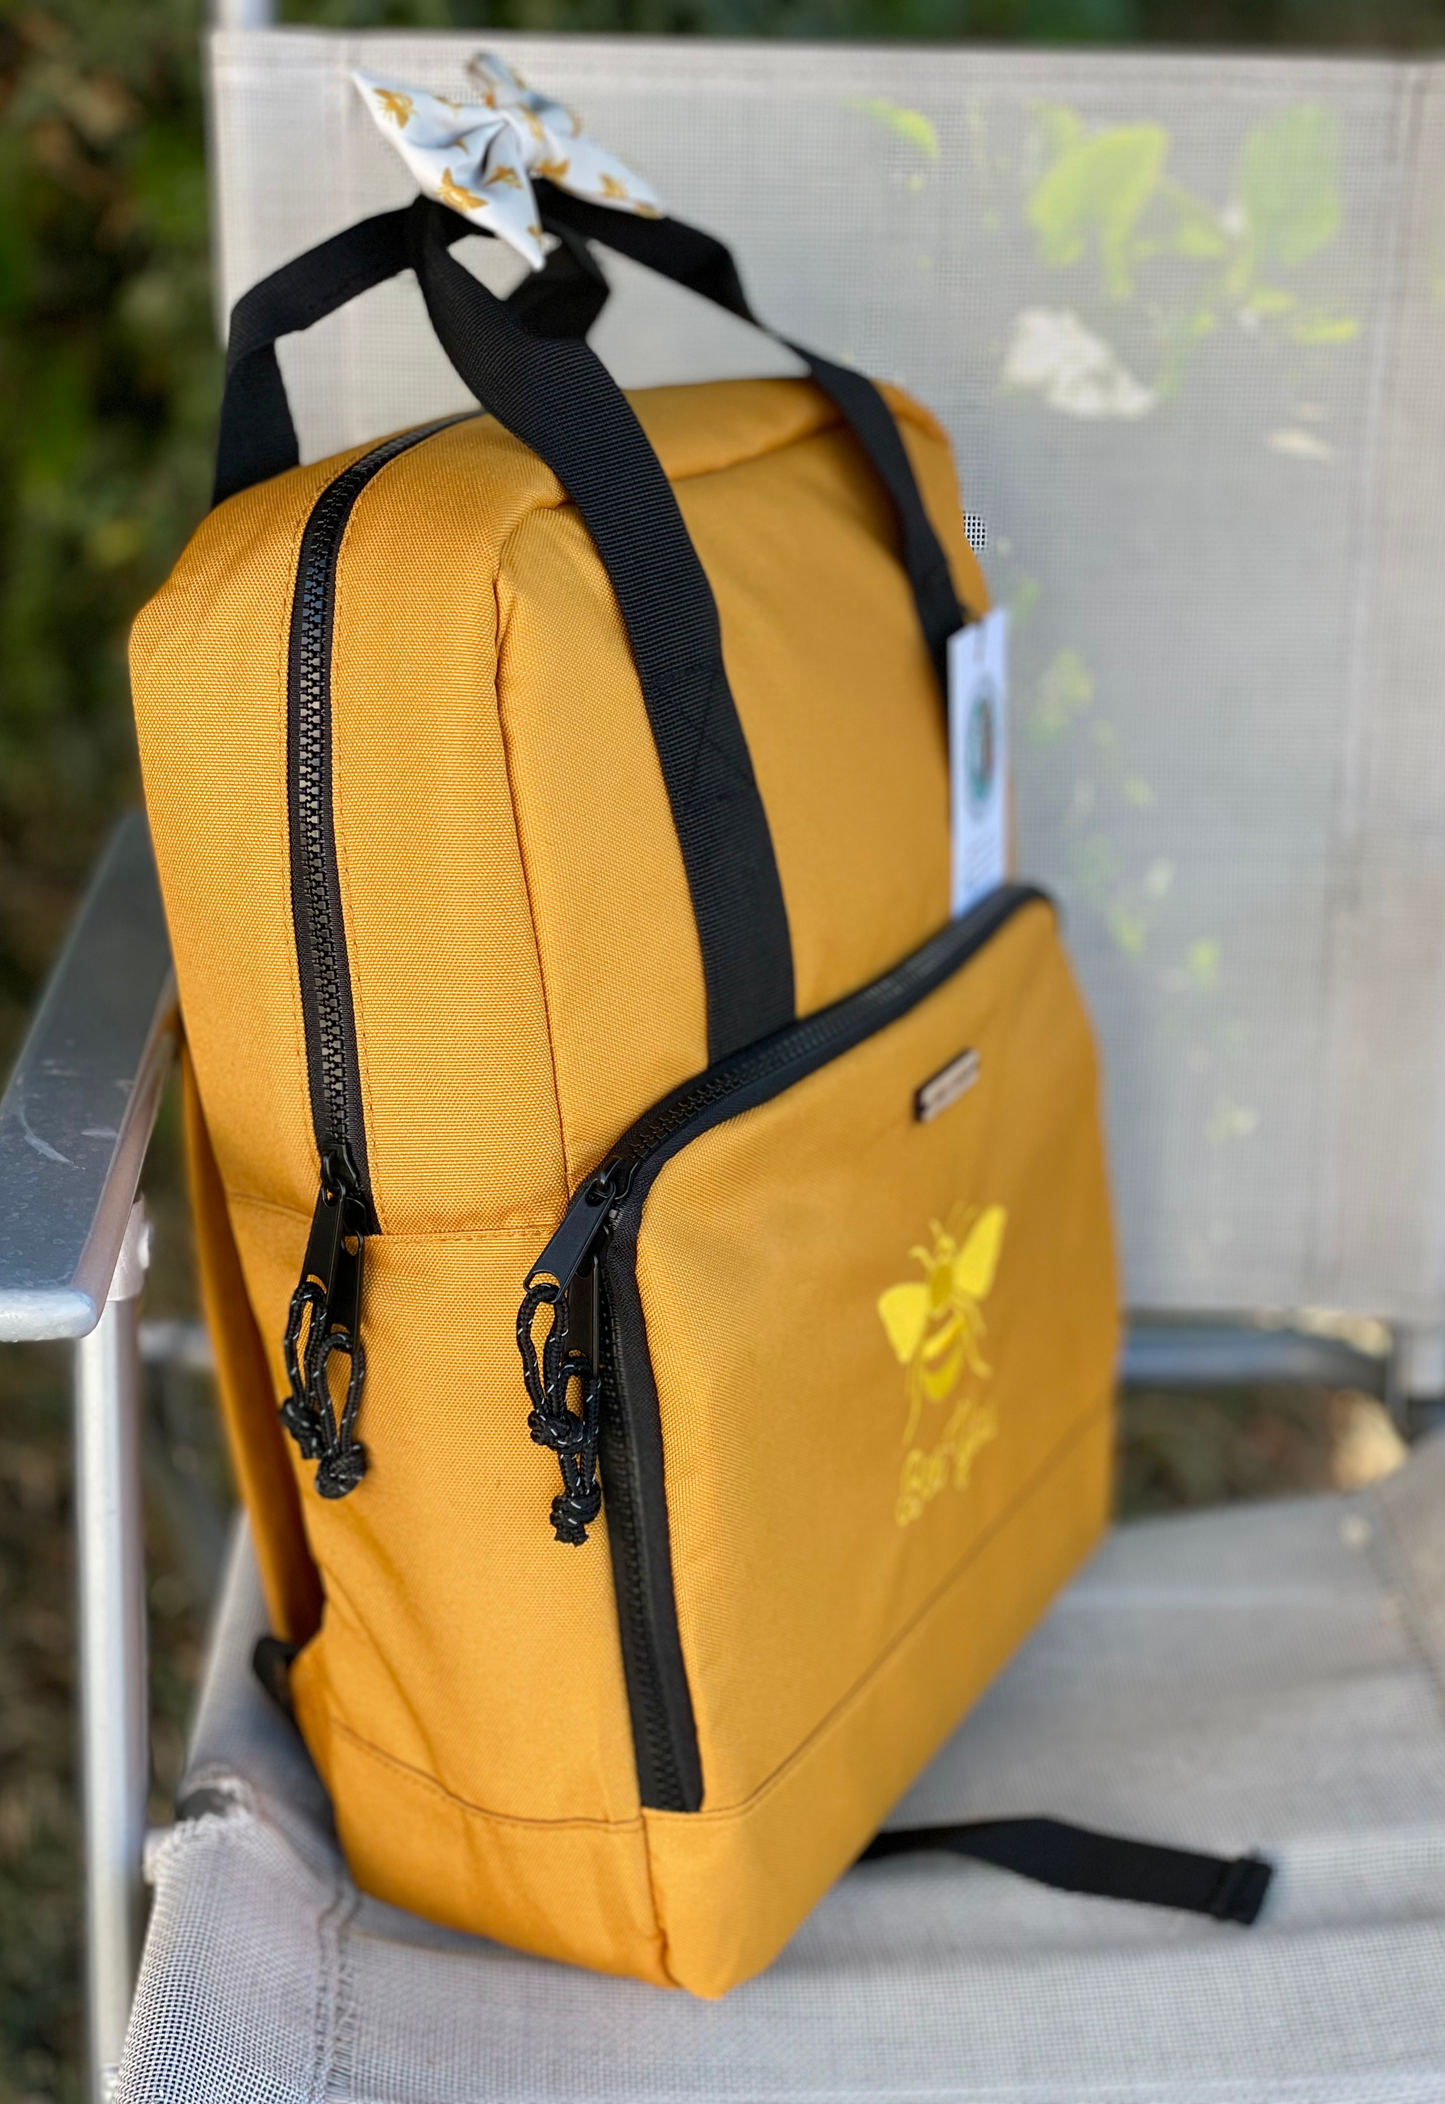 Embroidered Zip-Top Cooler Backpack - 'Bee You'